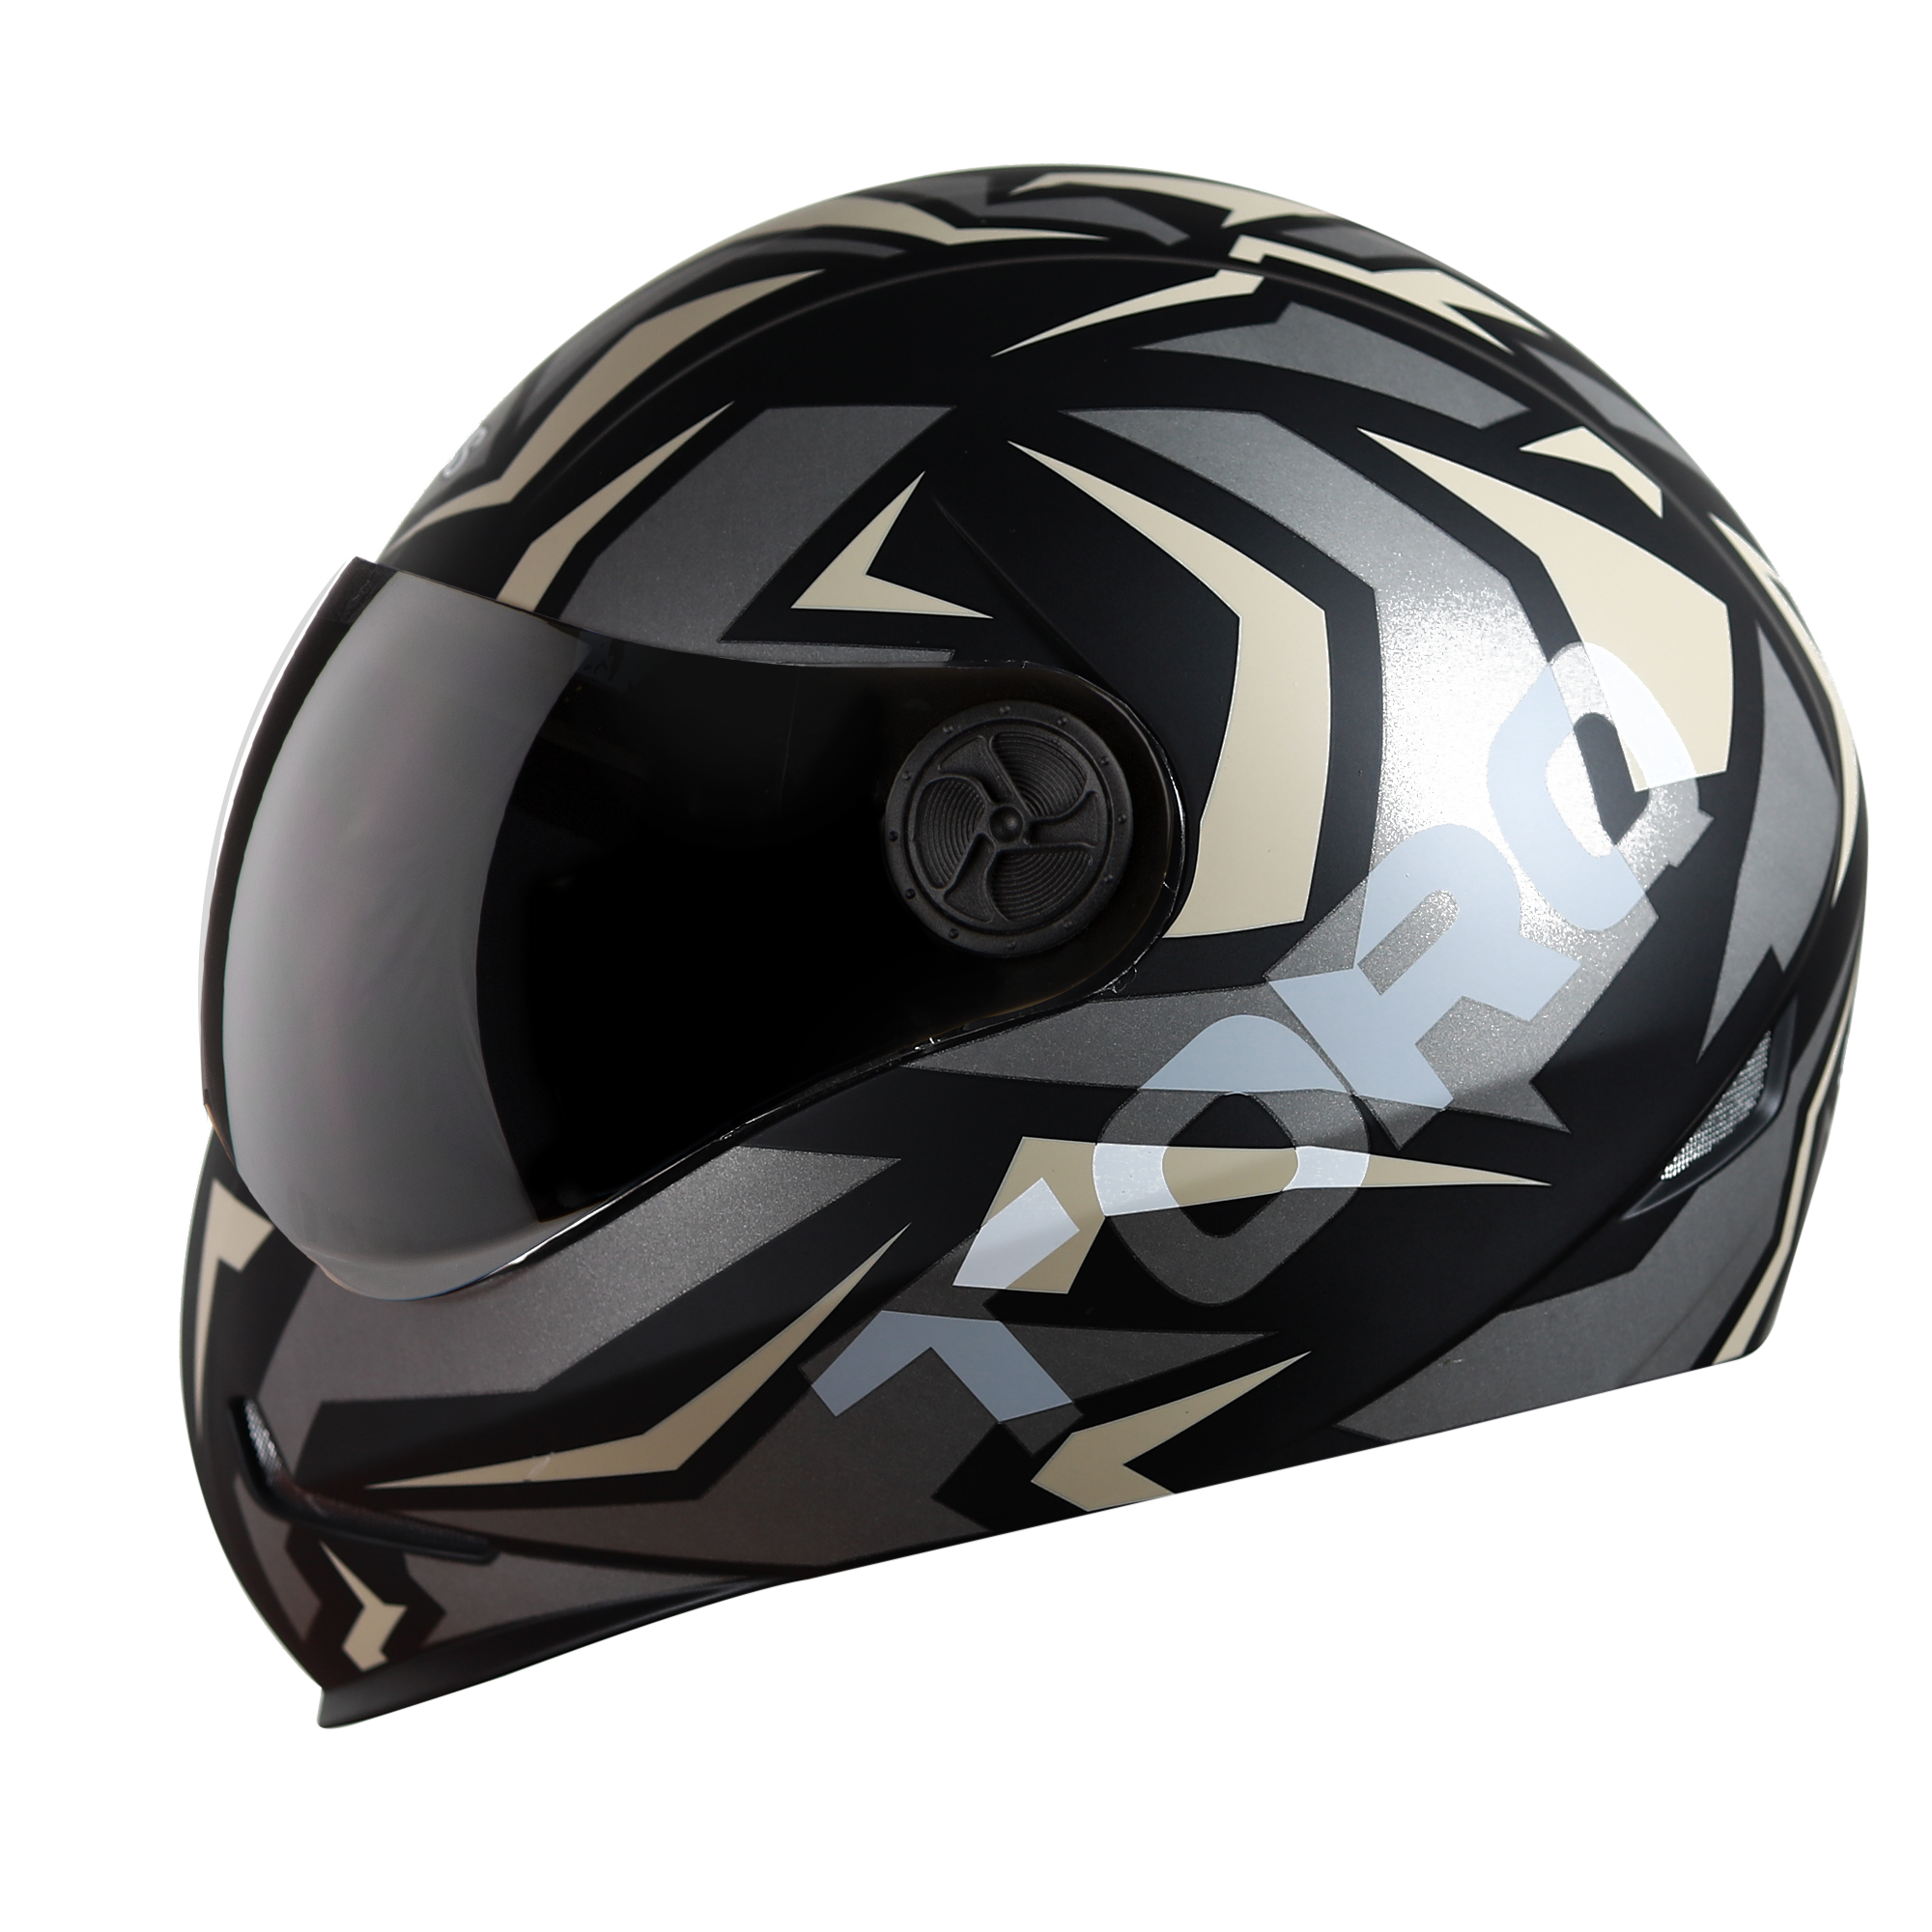 Adonis Torq Mat Black With Gold( Fitted With Clear Visor Extra Smoke Visor Free)